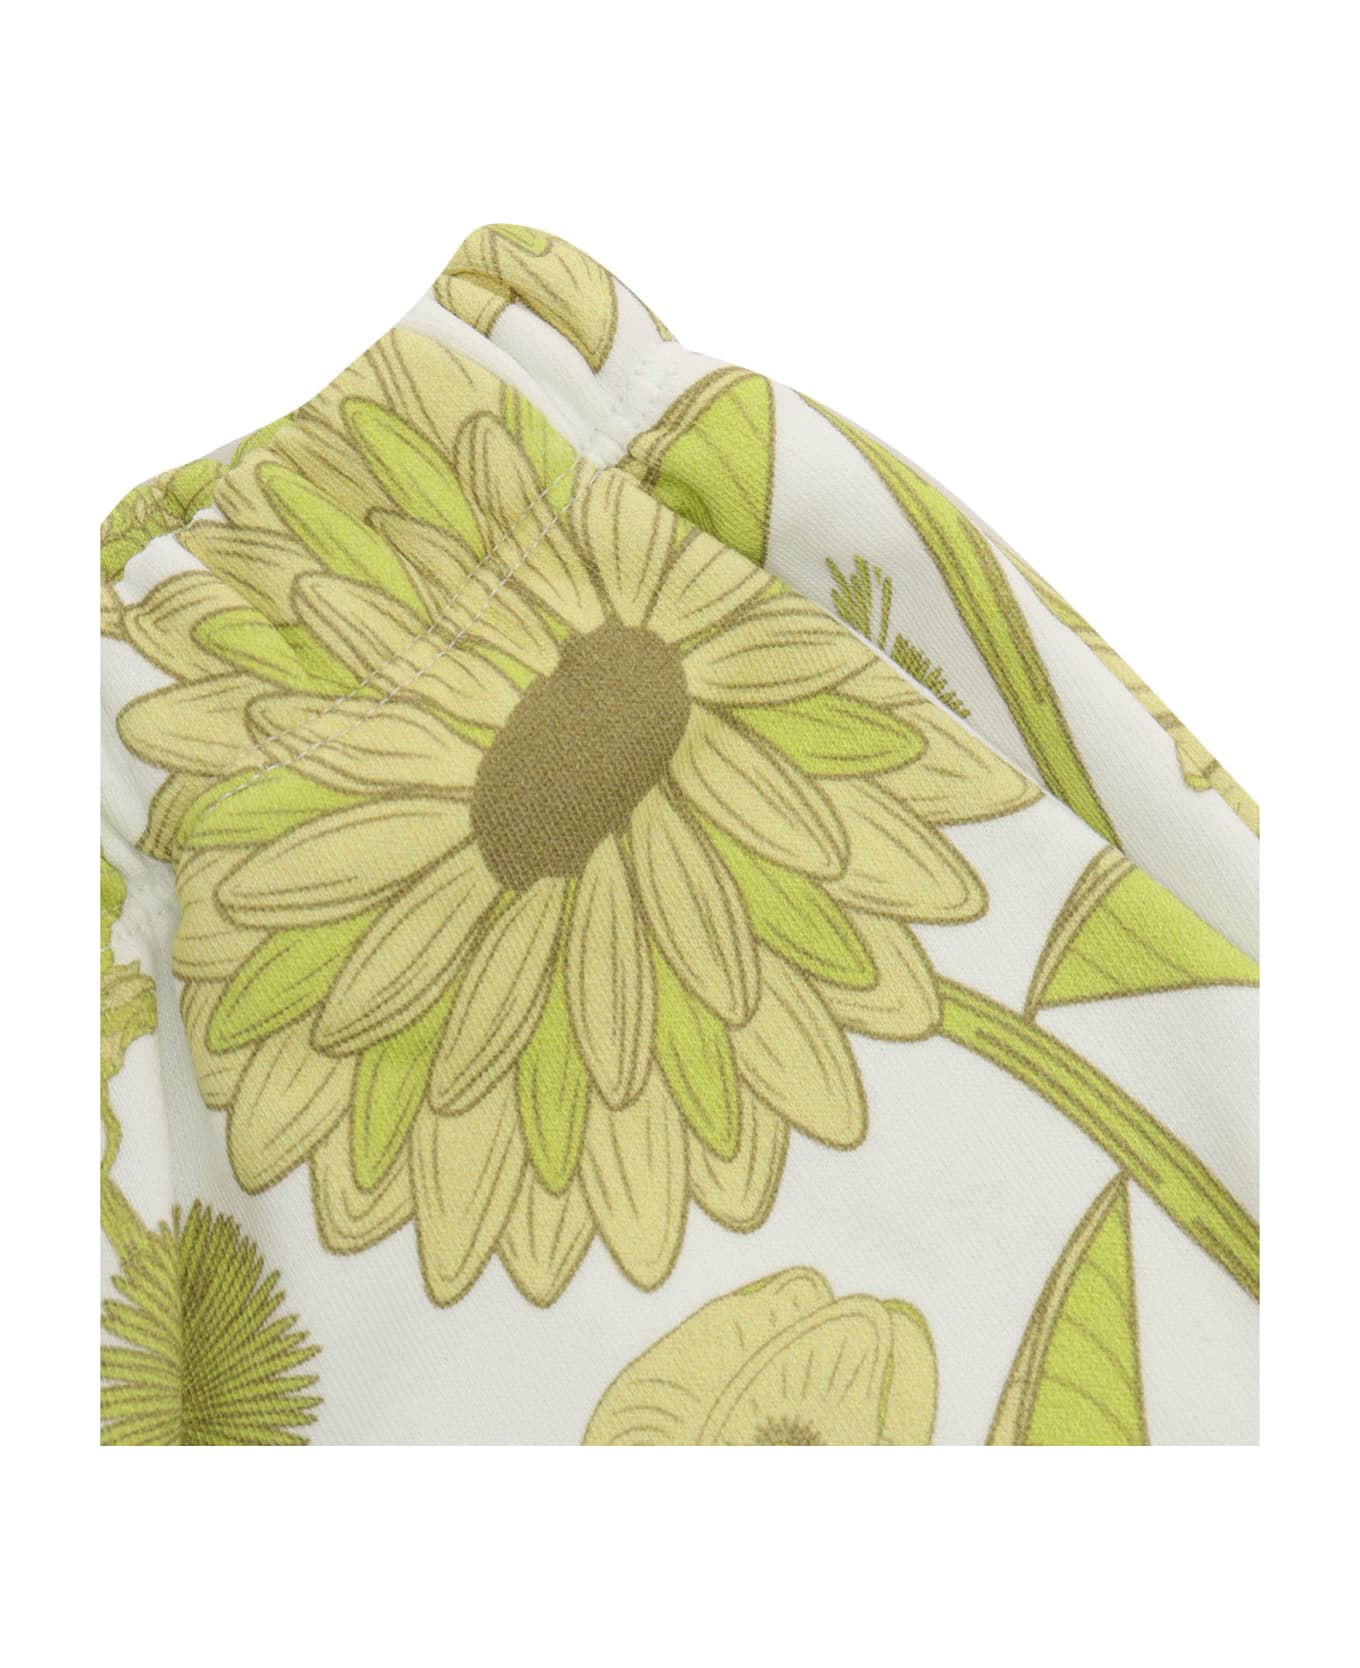 Douuod Shorts With Yellow Flowers - WHITE